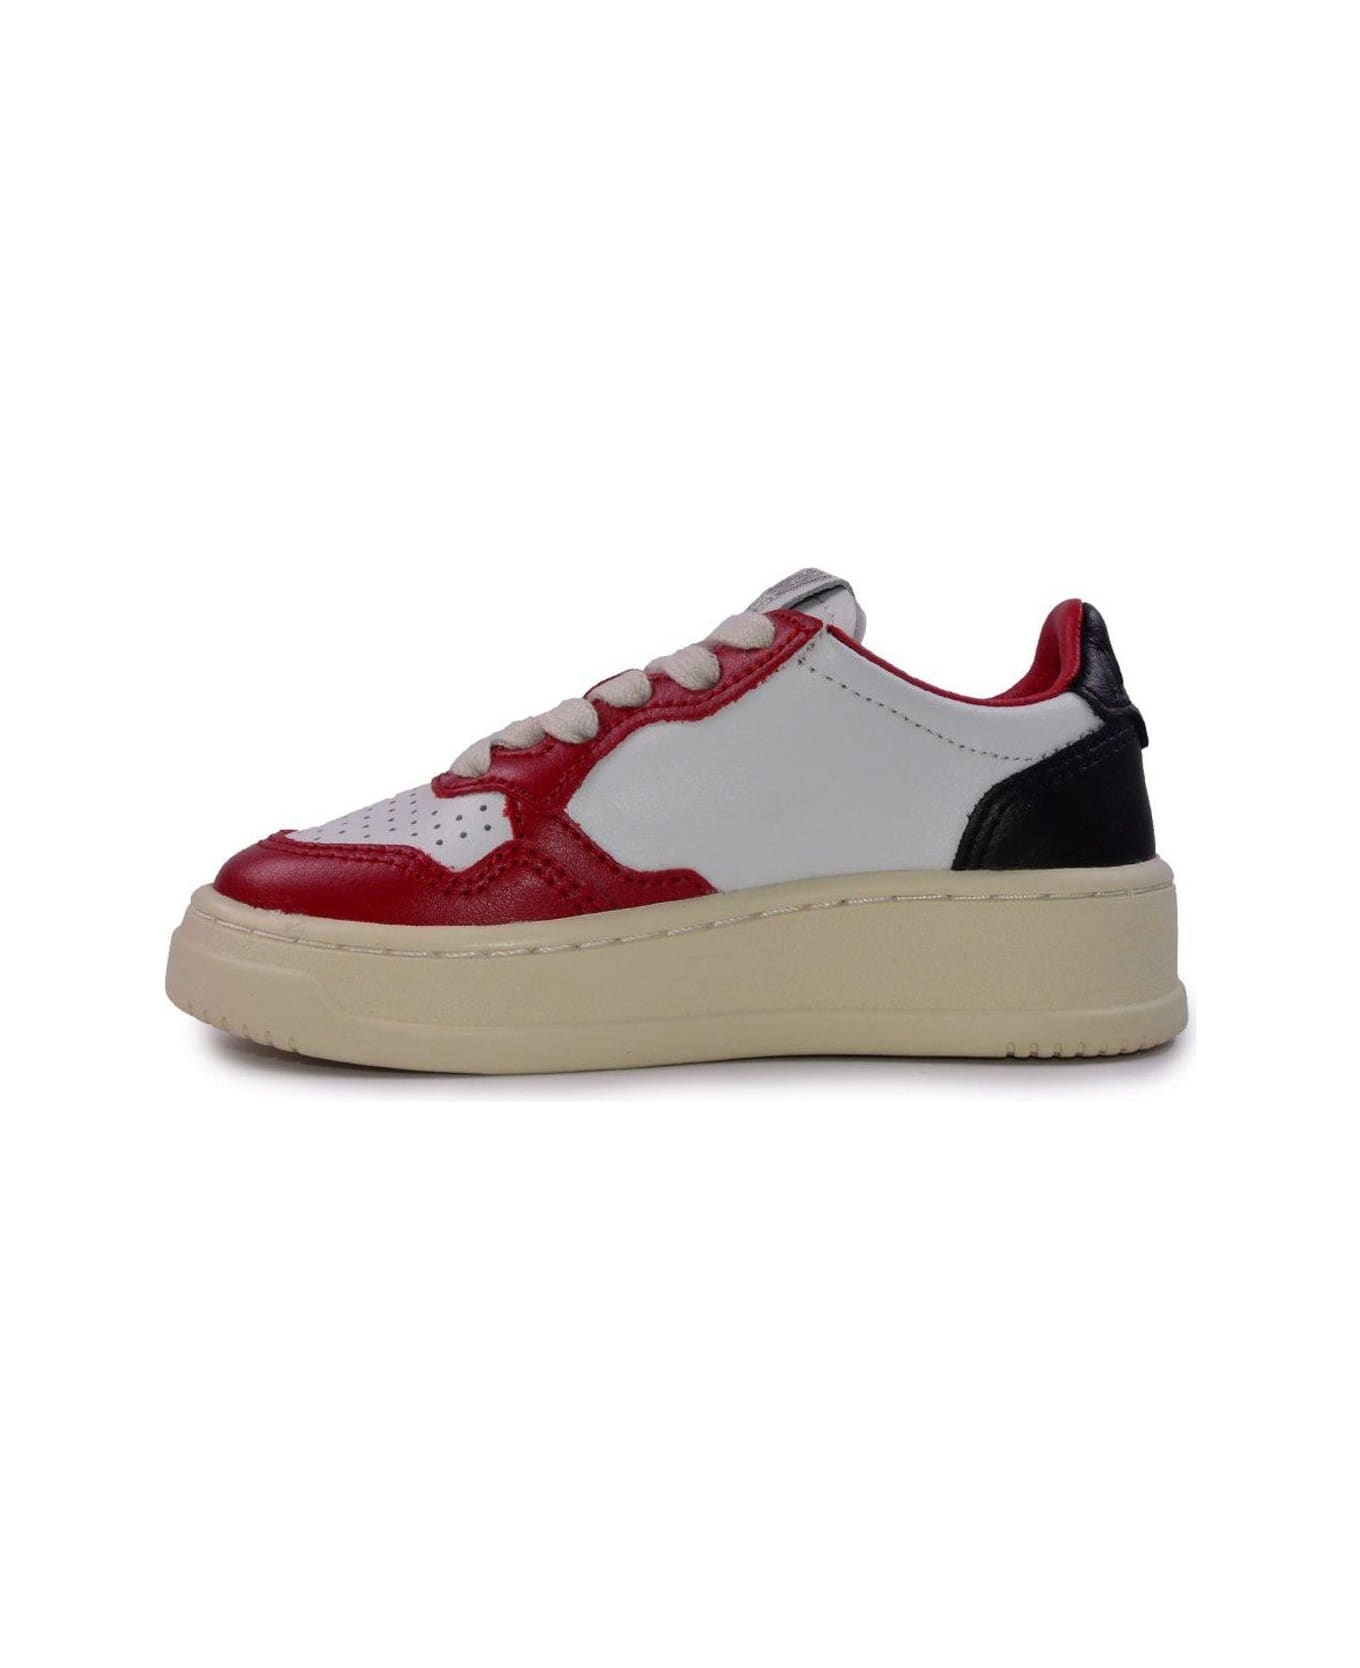 Autry Medalist Lace-up Sneakers - Bianco e Rosso シューズ